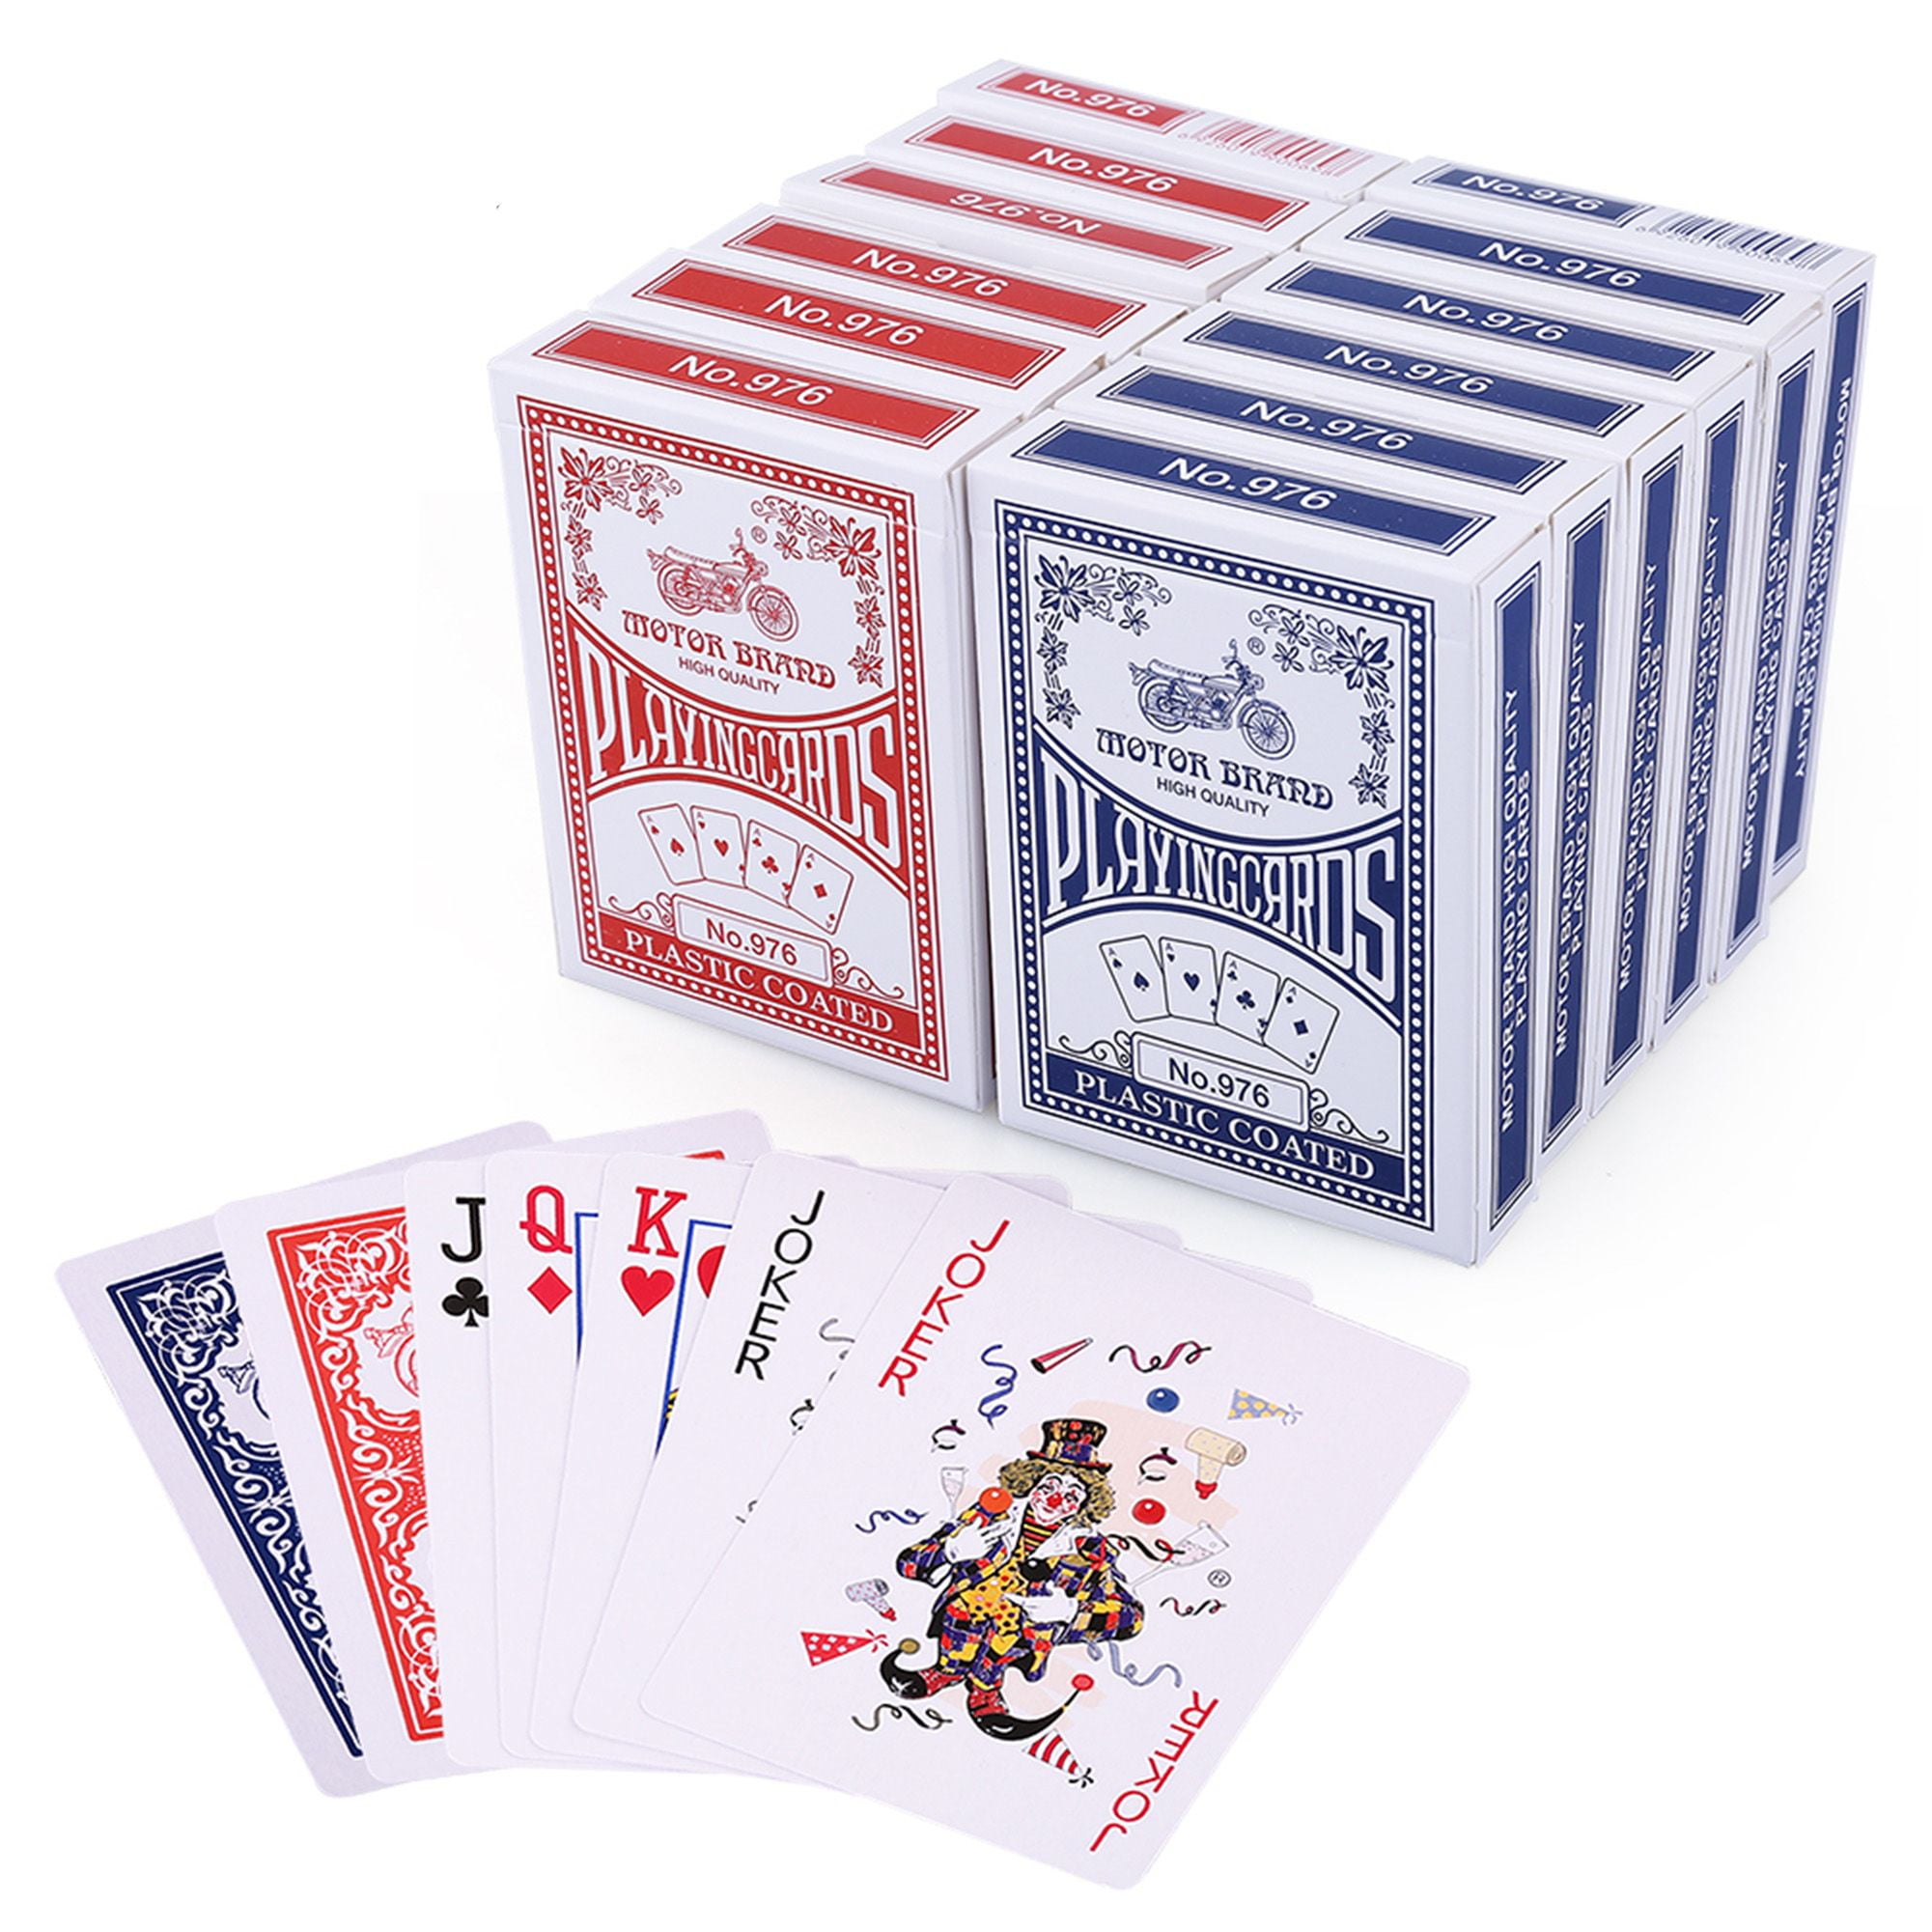 Congress Cat and Dog Playing Cards Standard Index Pack of 2 